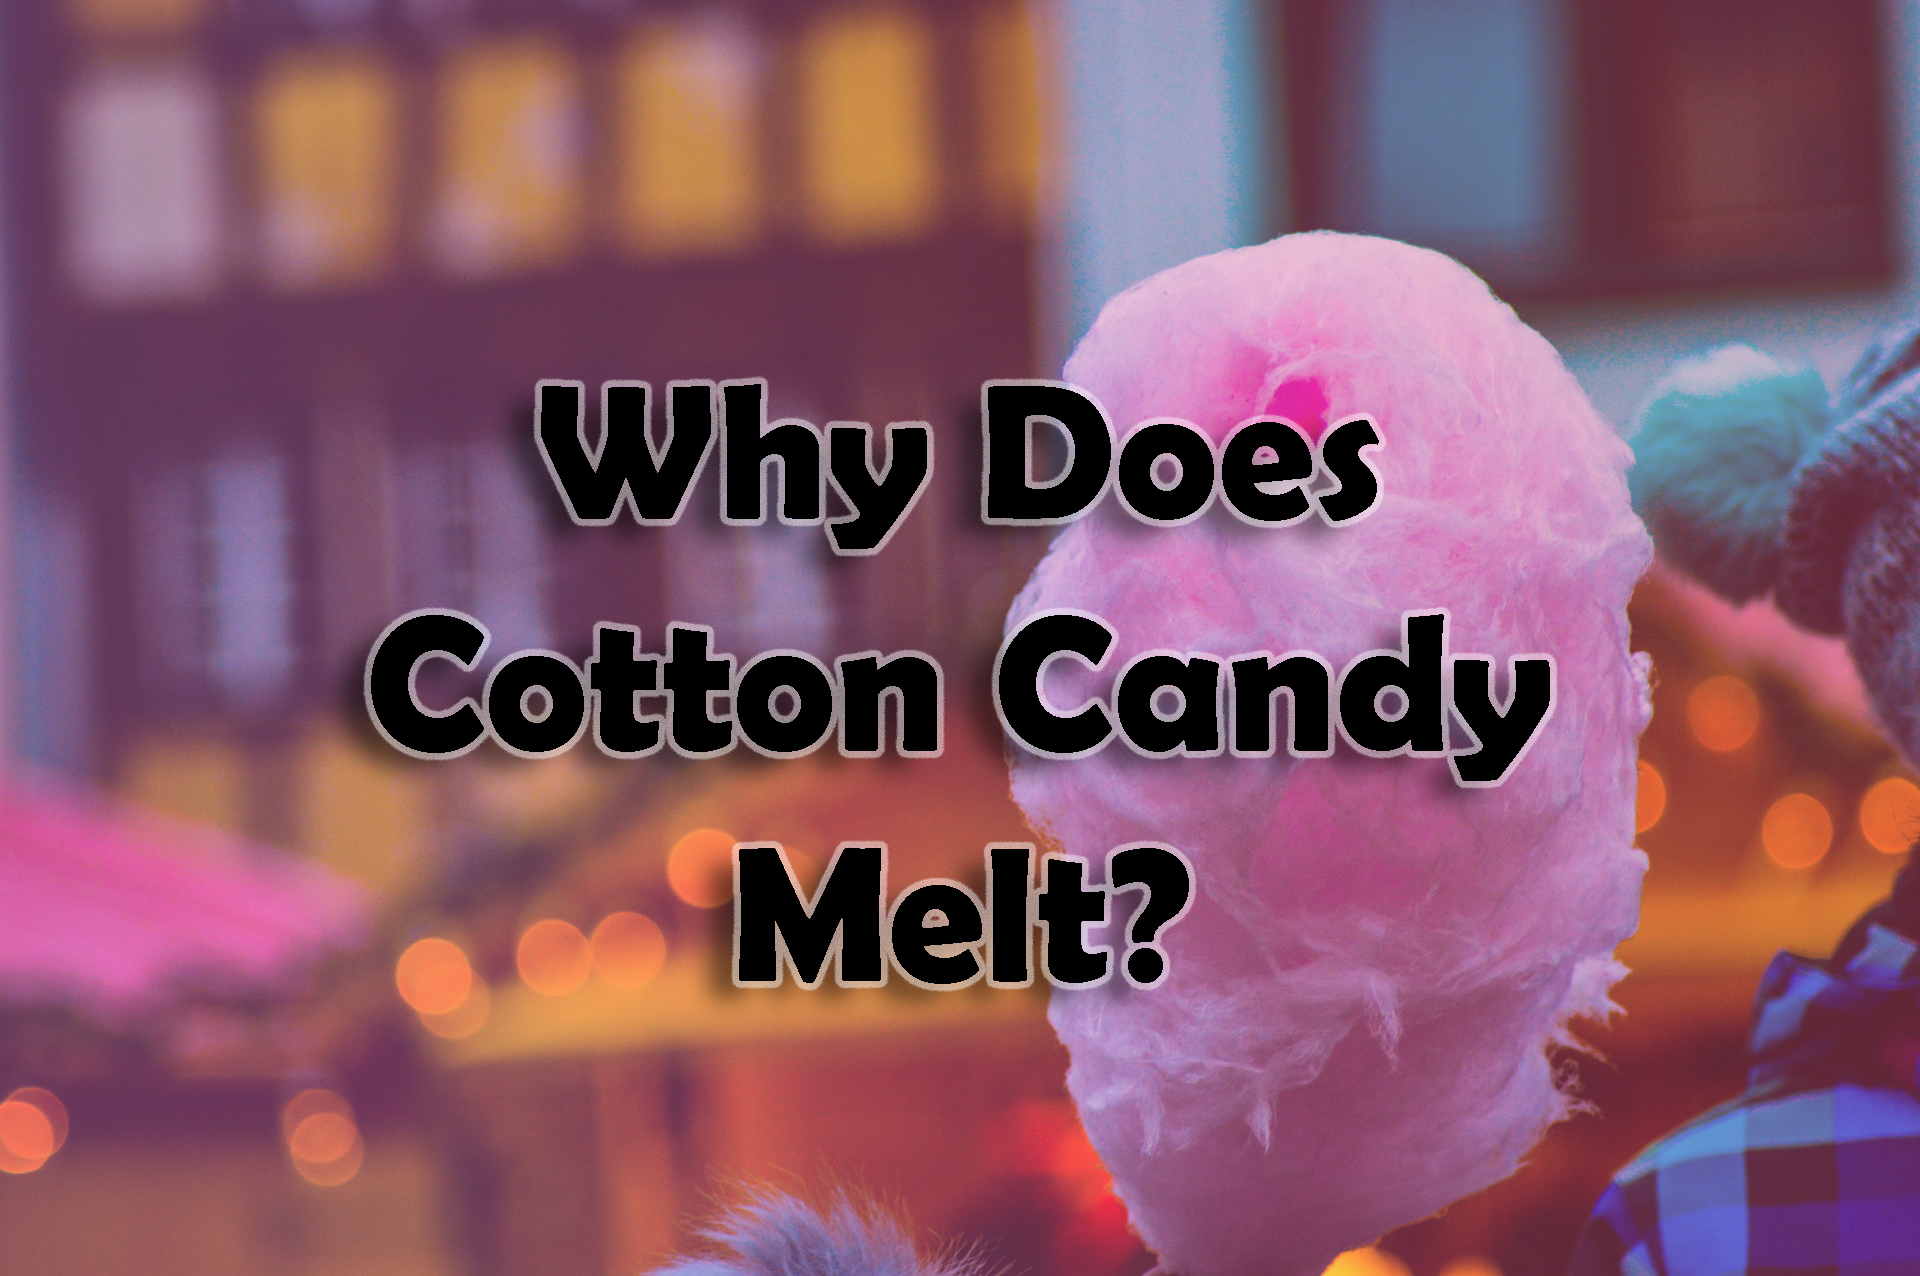 Why Does Cotton Candy Melt?